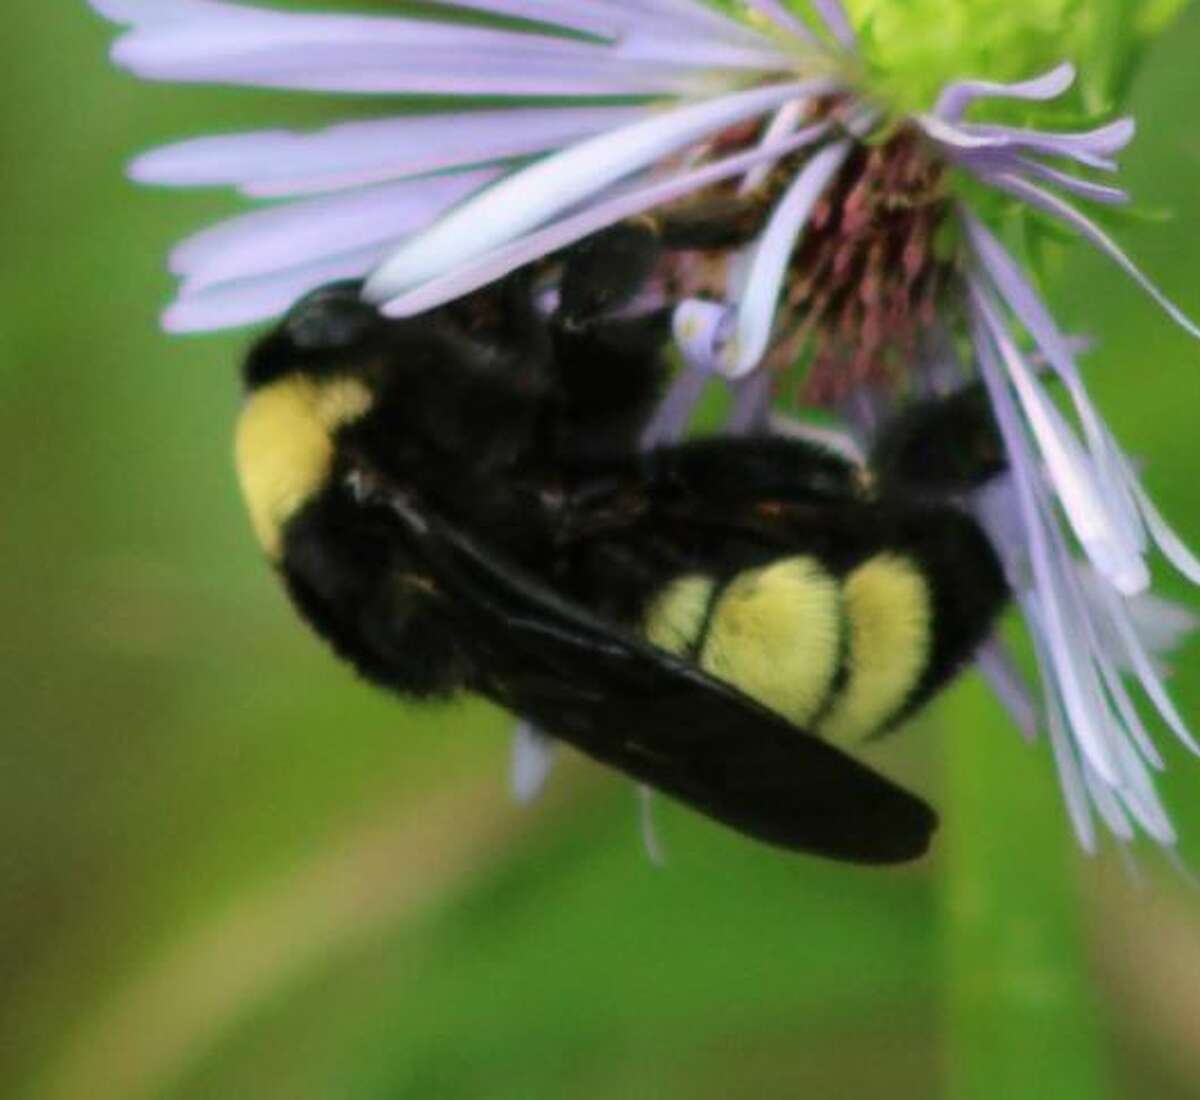 The American bumble bee will be considered for the Endangered Species list but it will likely take several years.